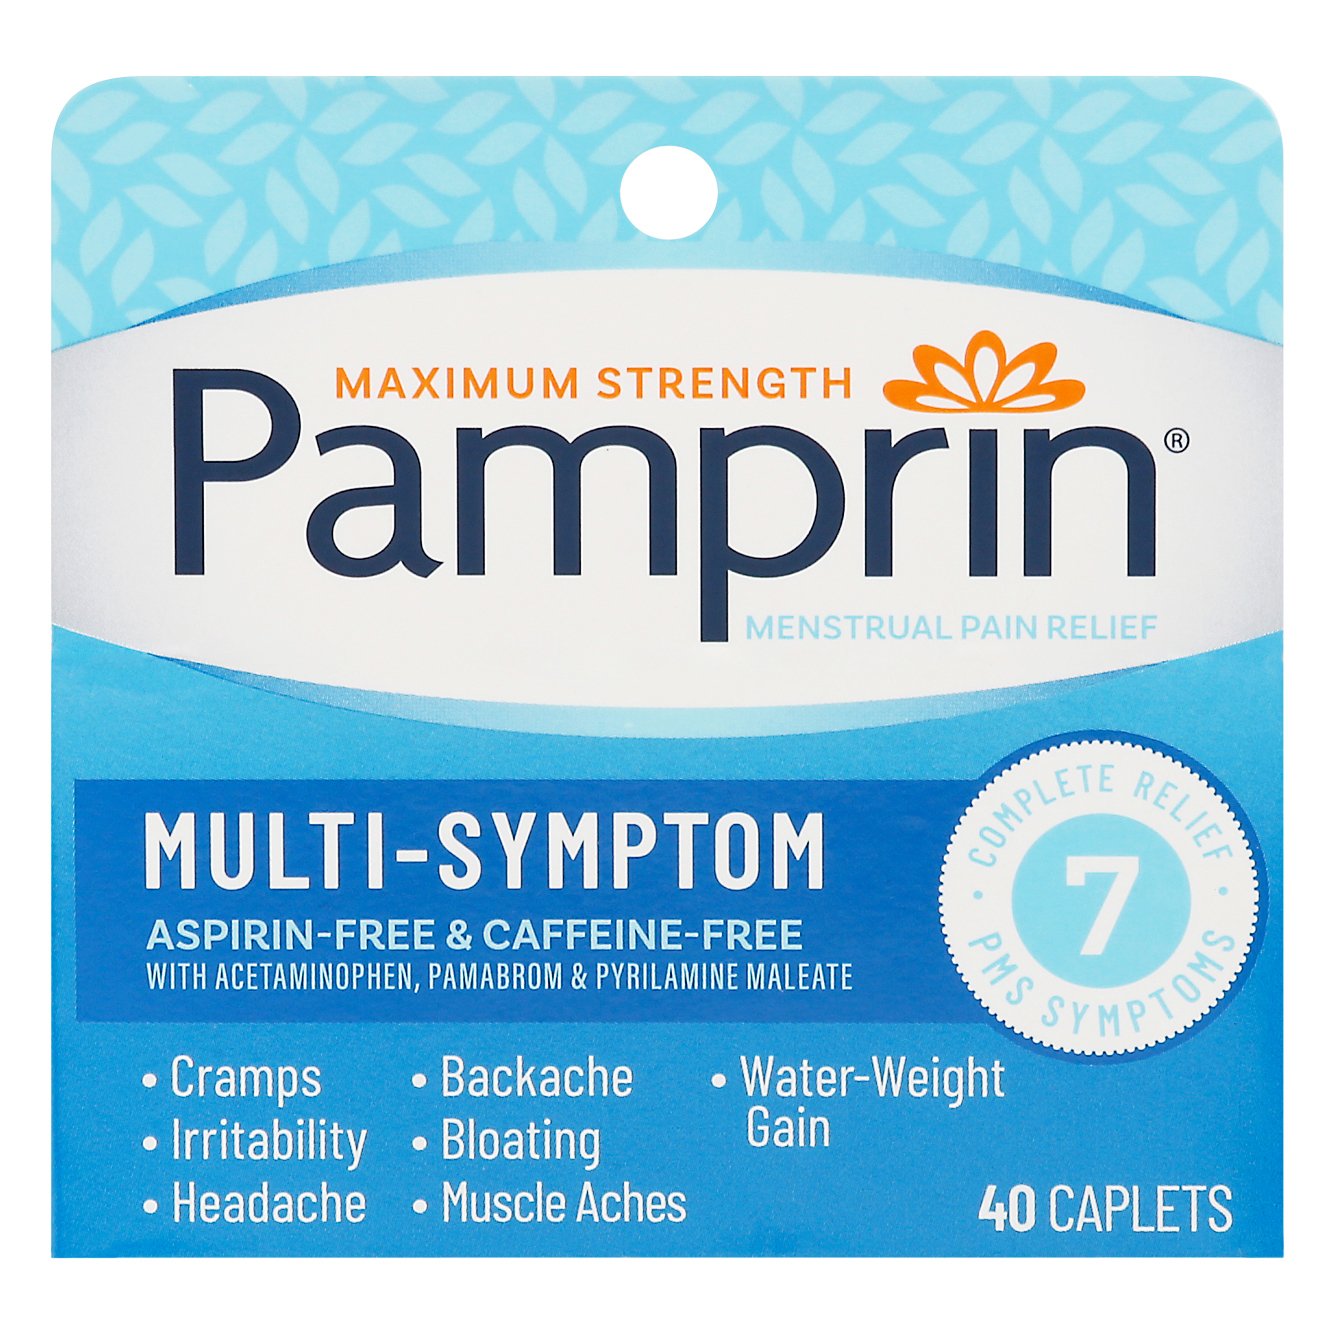 Menstrual Pain and Cramps: Period Pain Relief Finder